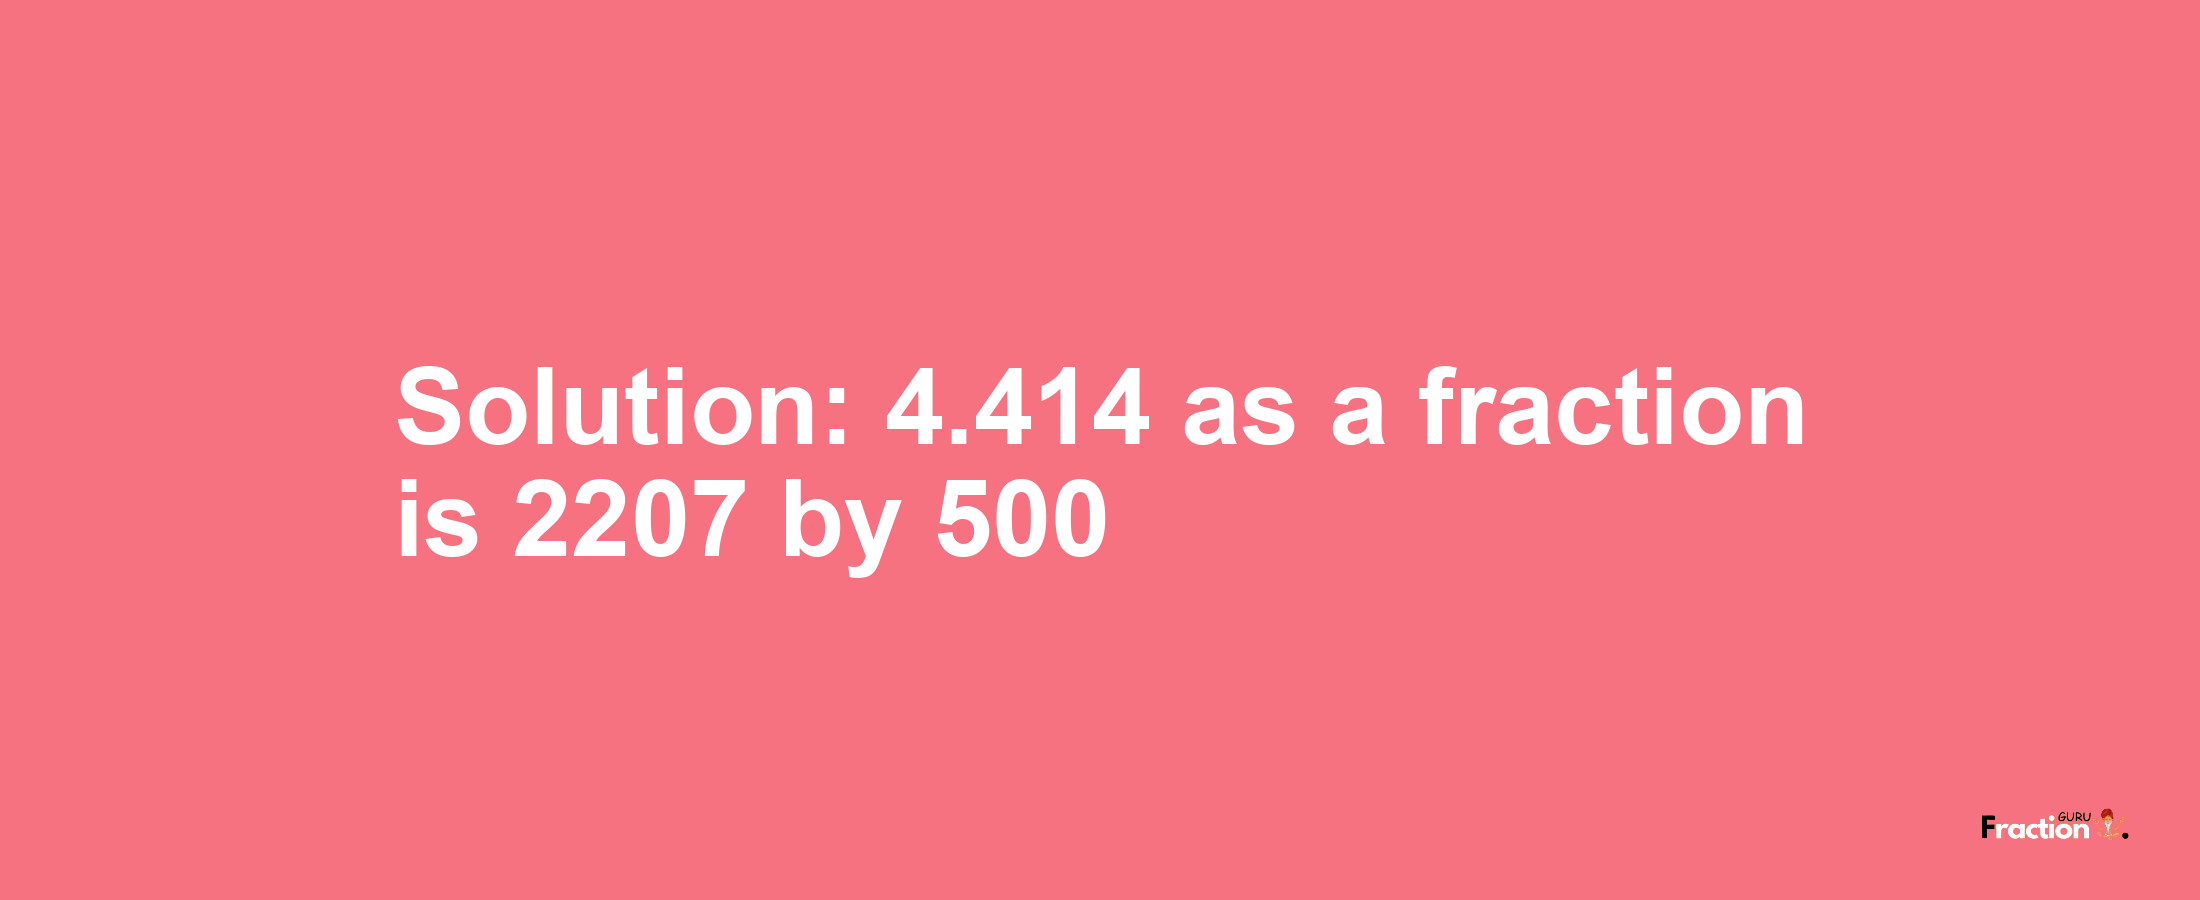 Solution:4.414 as a fraction is 2207/500